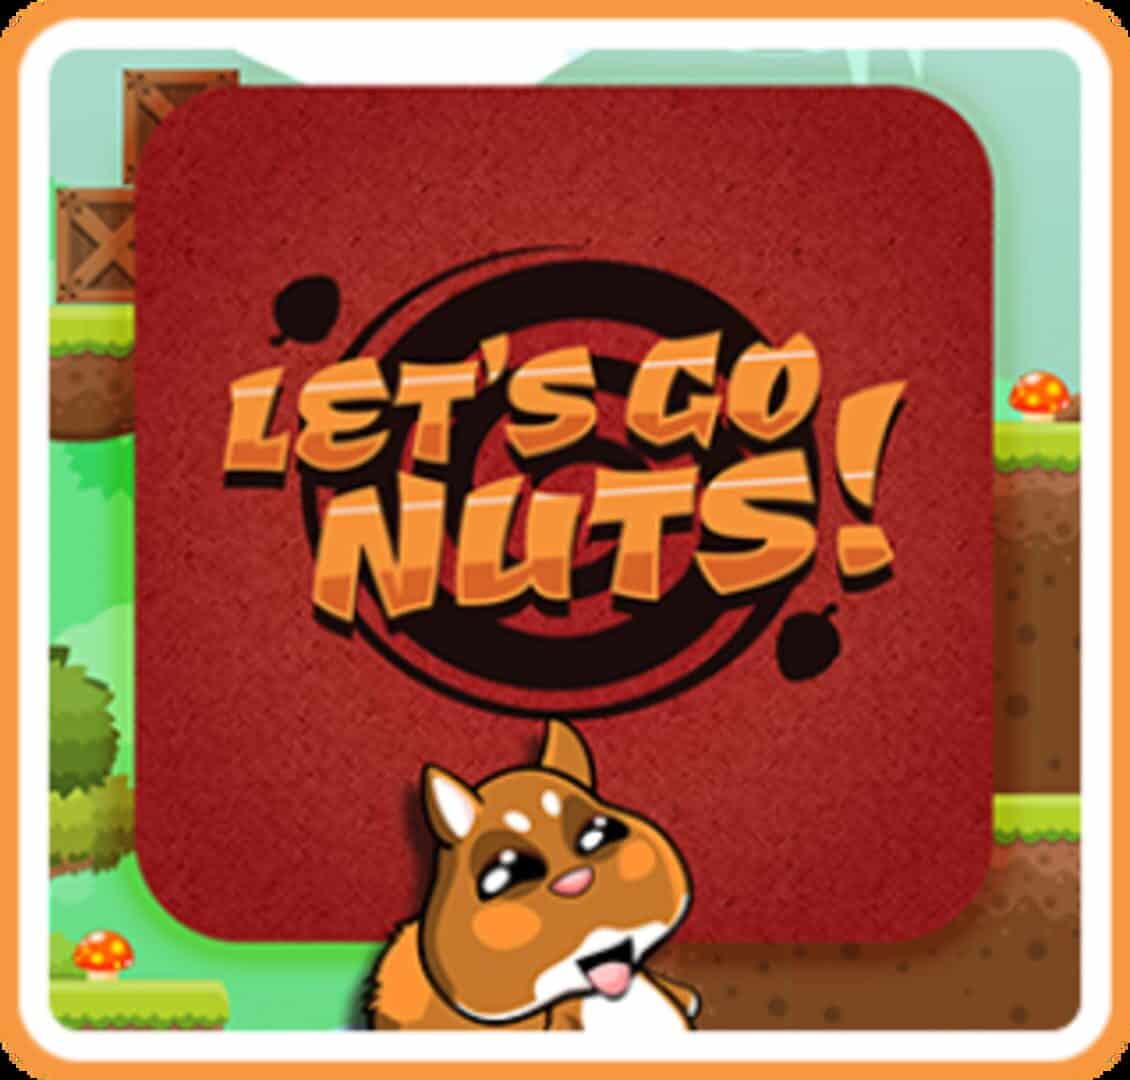 Let's Go Nuts!